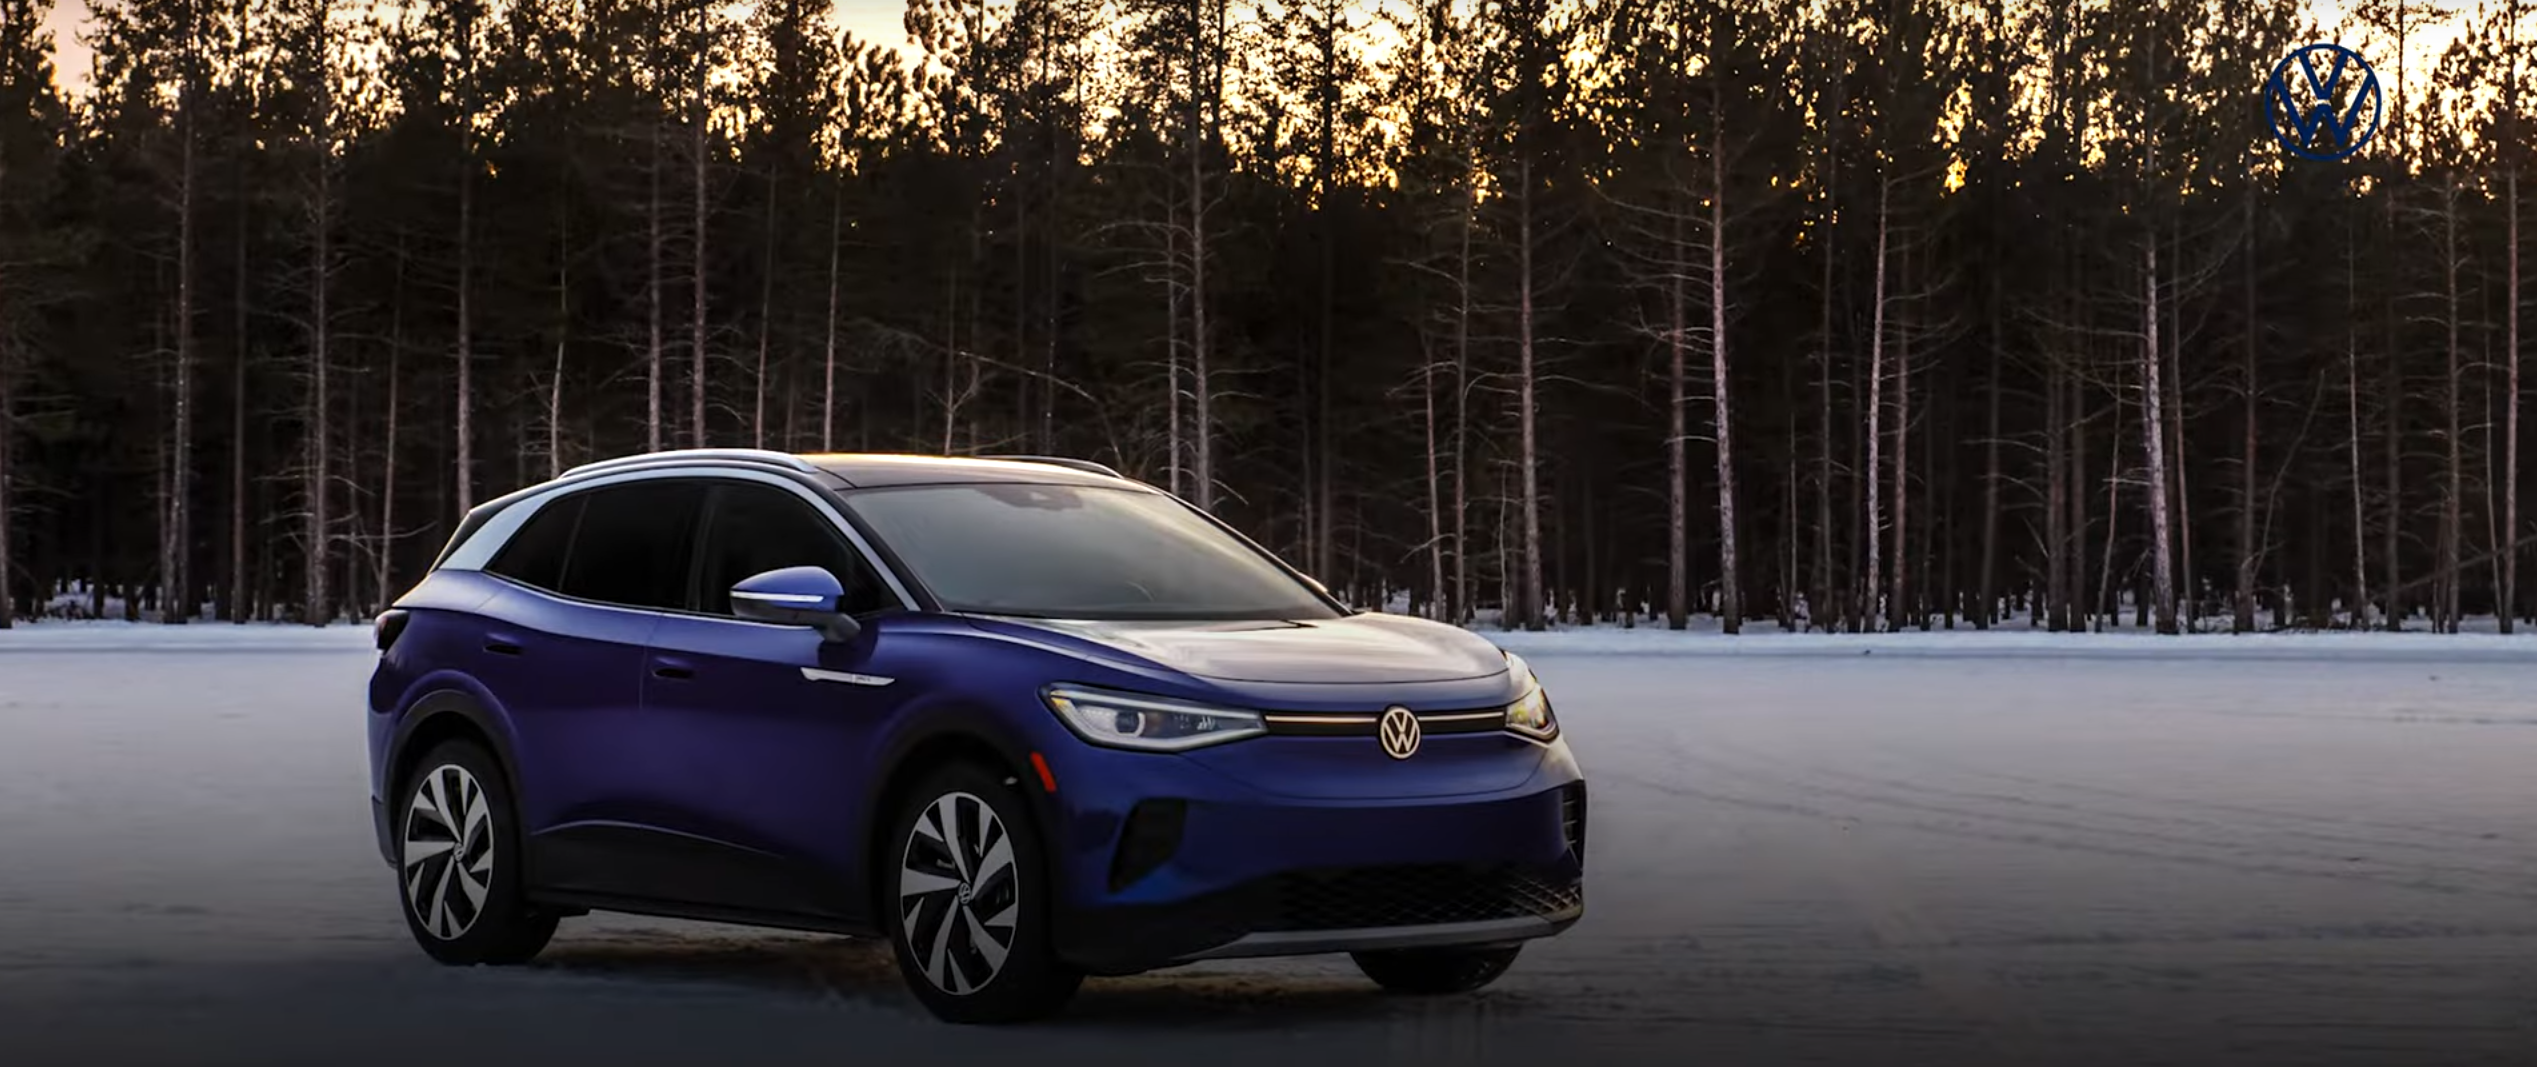 Volkswagen Tests How Long ID.4 Pro S EV Can Stay Warm in Sub-freezing Temperatures